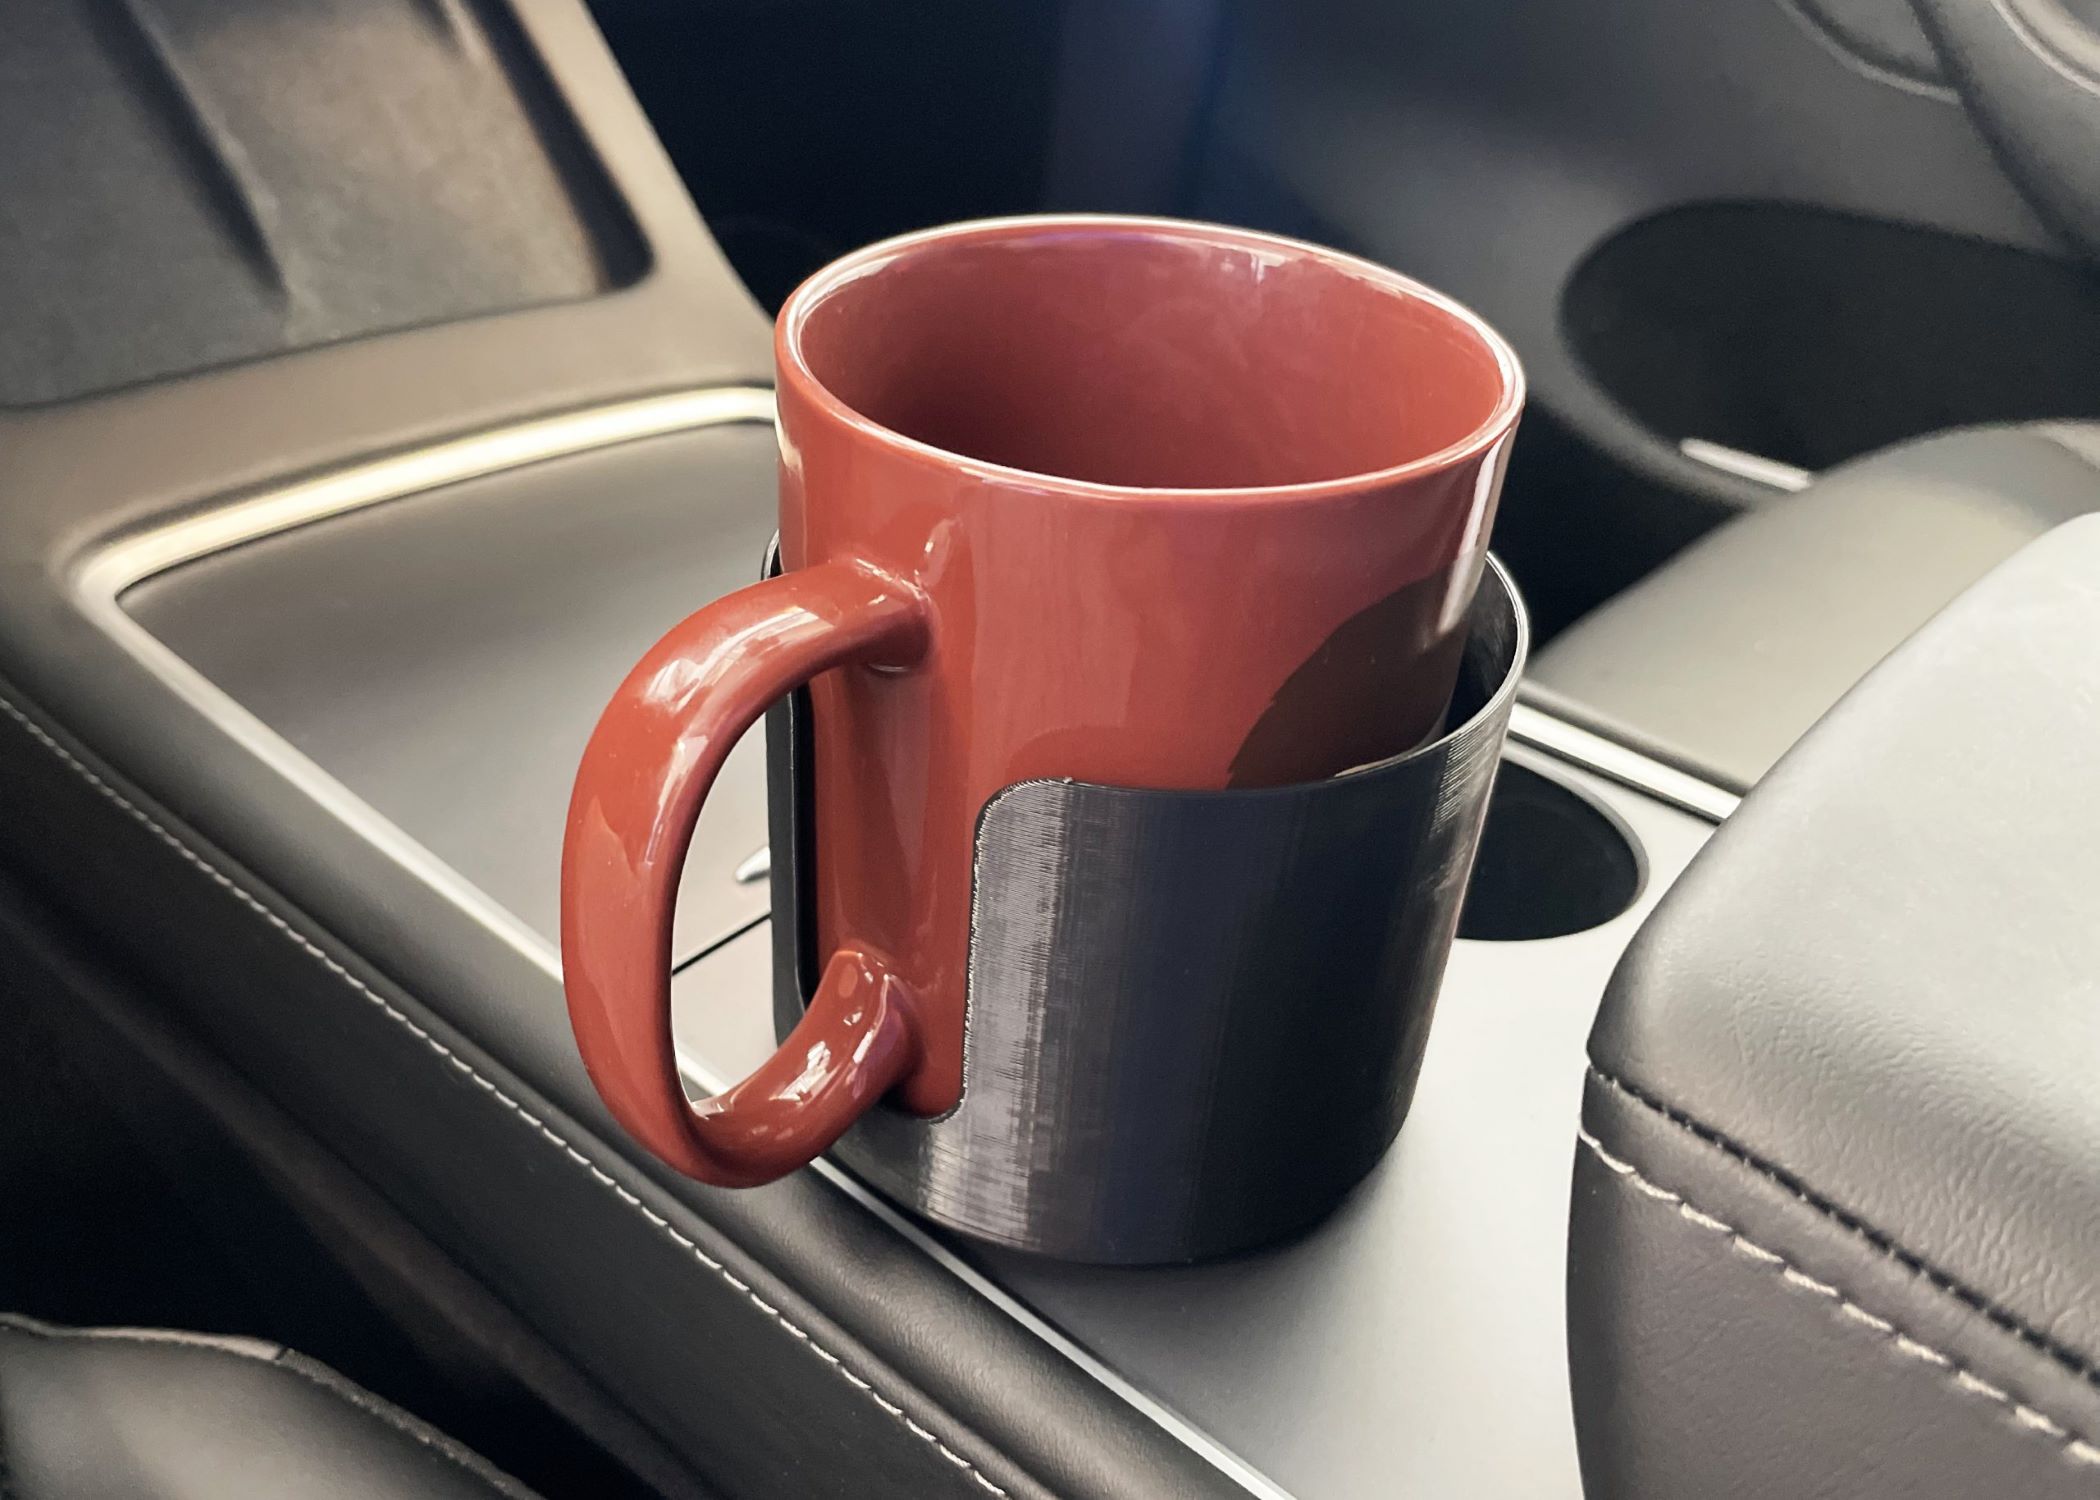 Does anyone have a design to make a car cupholder adapter for a 32